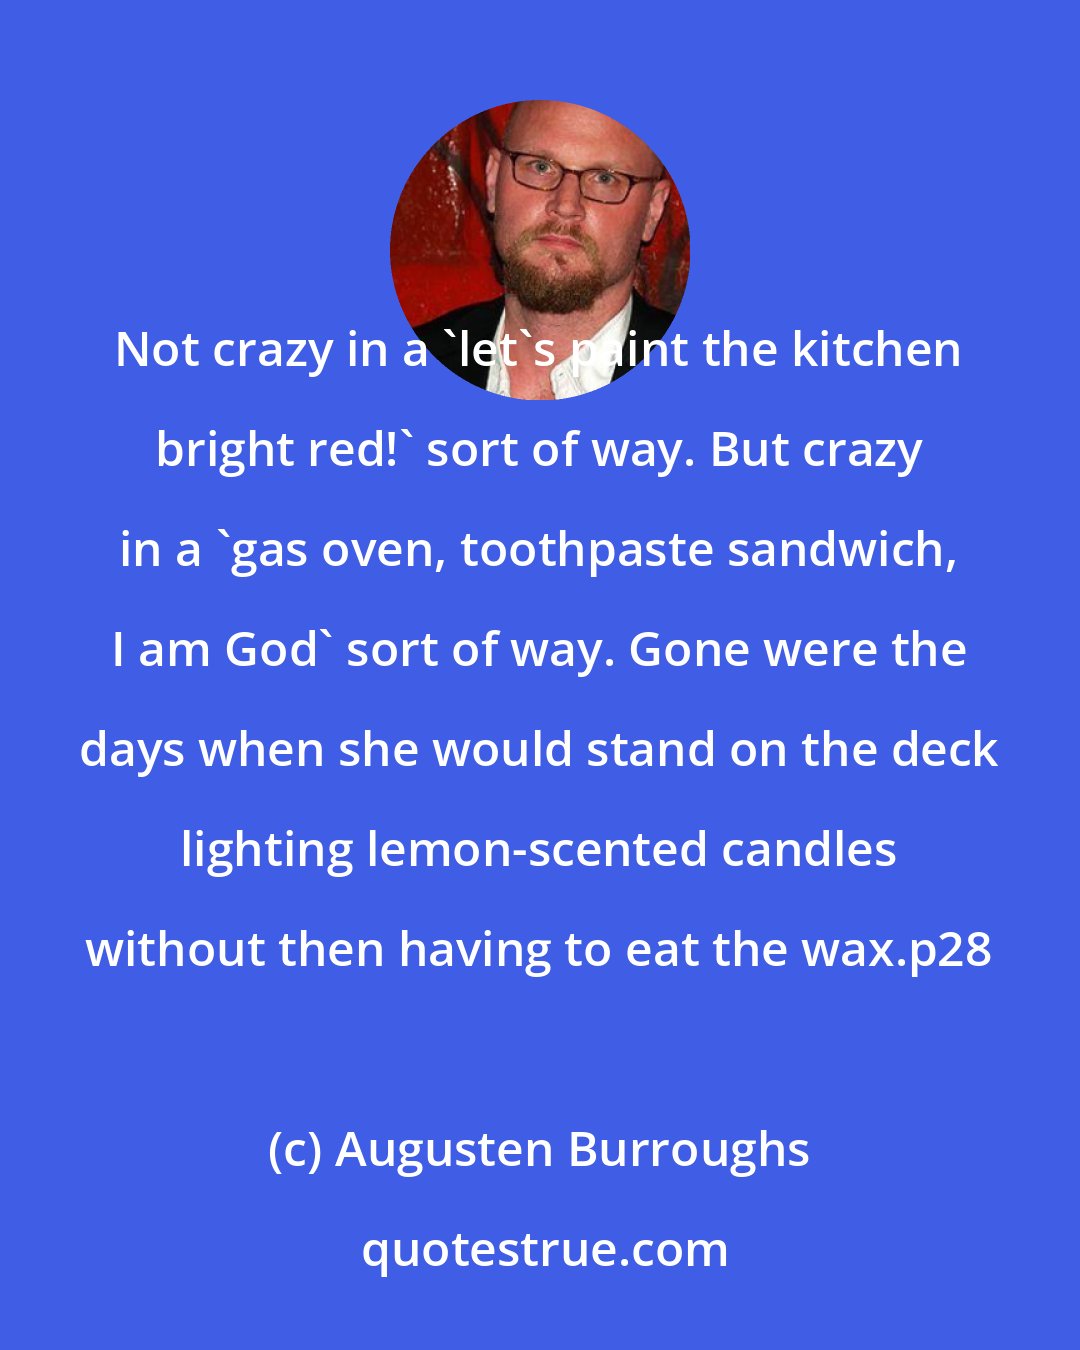 Augusten Burroughs: Not crazy in a 'let's paint the kitchen bright red!' sort of way. But crazy in a 'gas oven, toothpaste sandwich, I am God' sort of way. Gone were the days when she would stand on the deck lighting lemon-scented candles without then having to eat the wax.p28